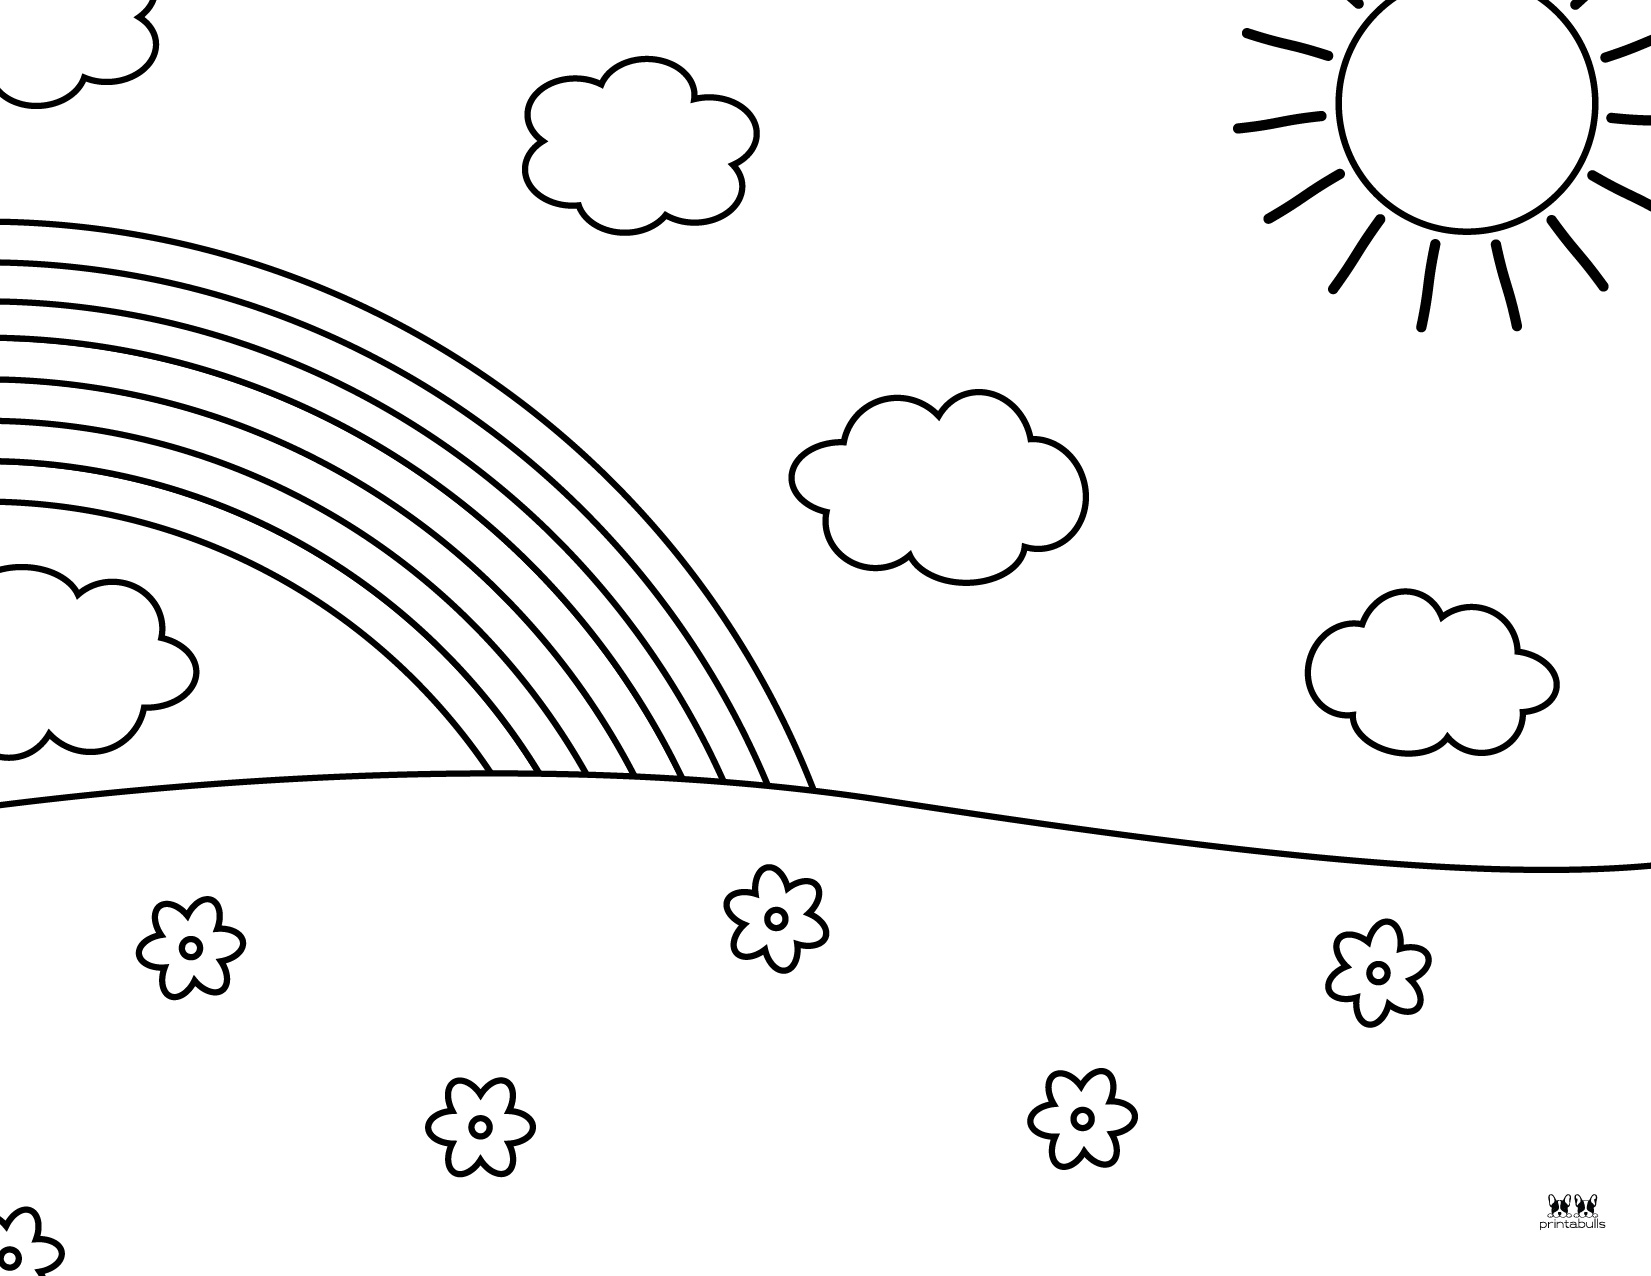 Rainbow Coloring Pages - 50 FREE Printable Pages | Printabulls